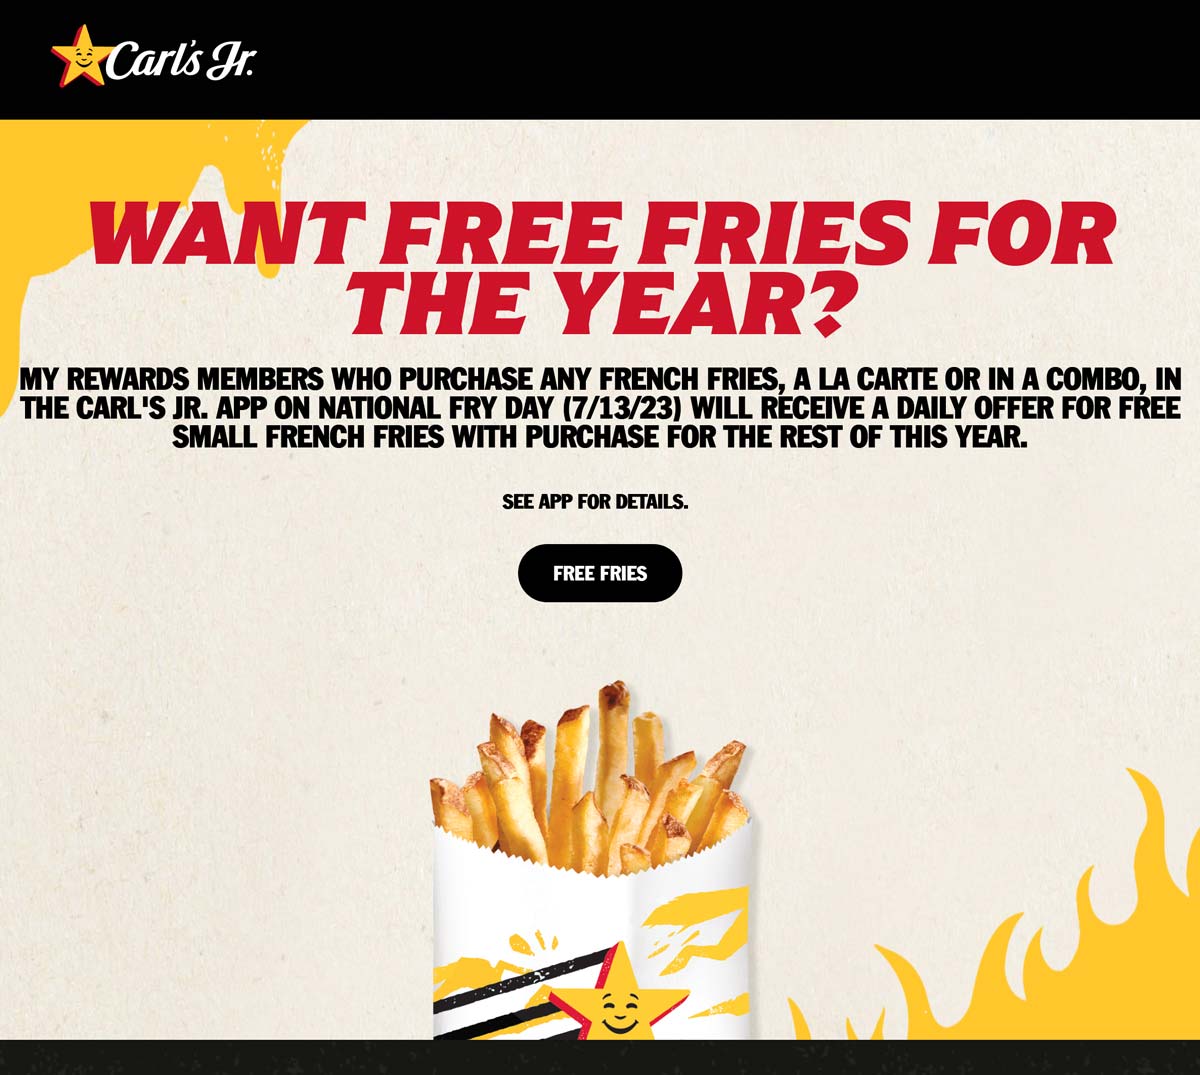 Carls Jr restaurants Coupon  Free fries daily all year with your fries Thursday at Carls Jr restaurants #carlsjr 